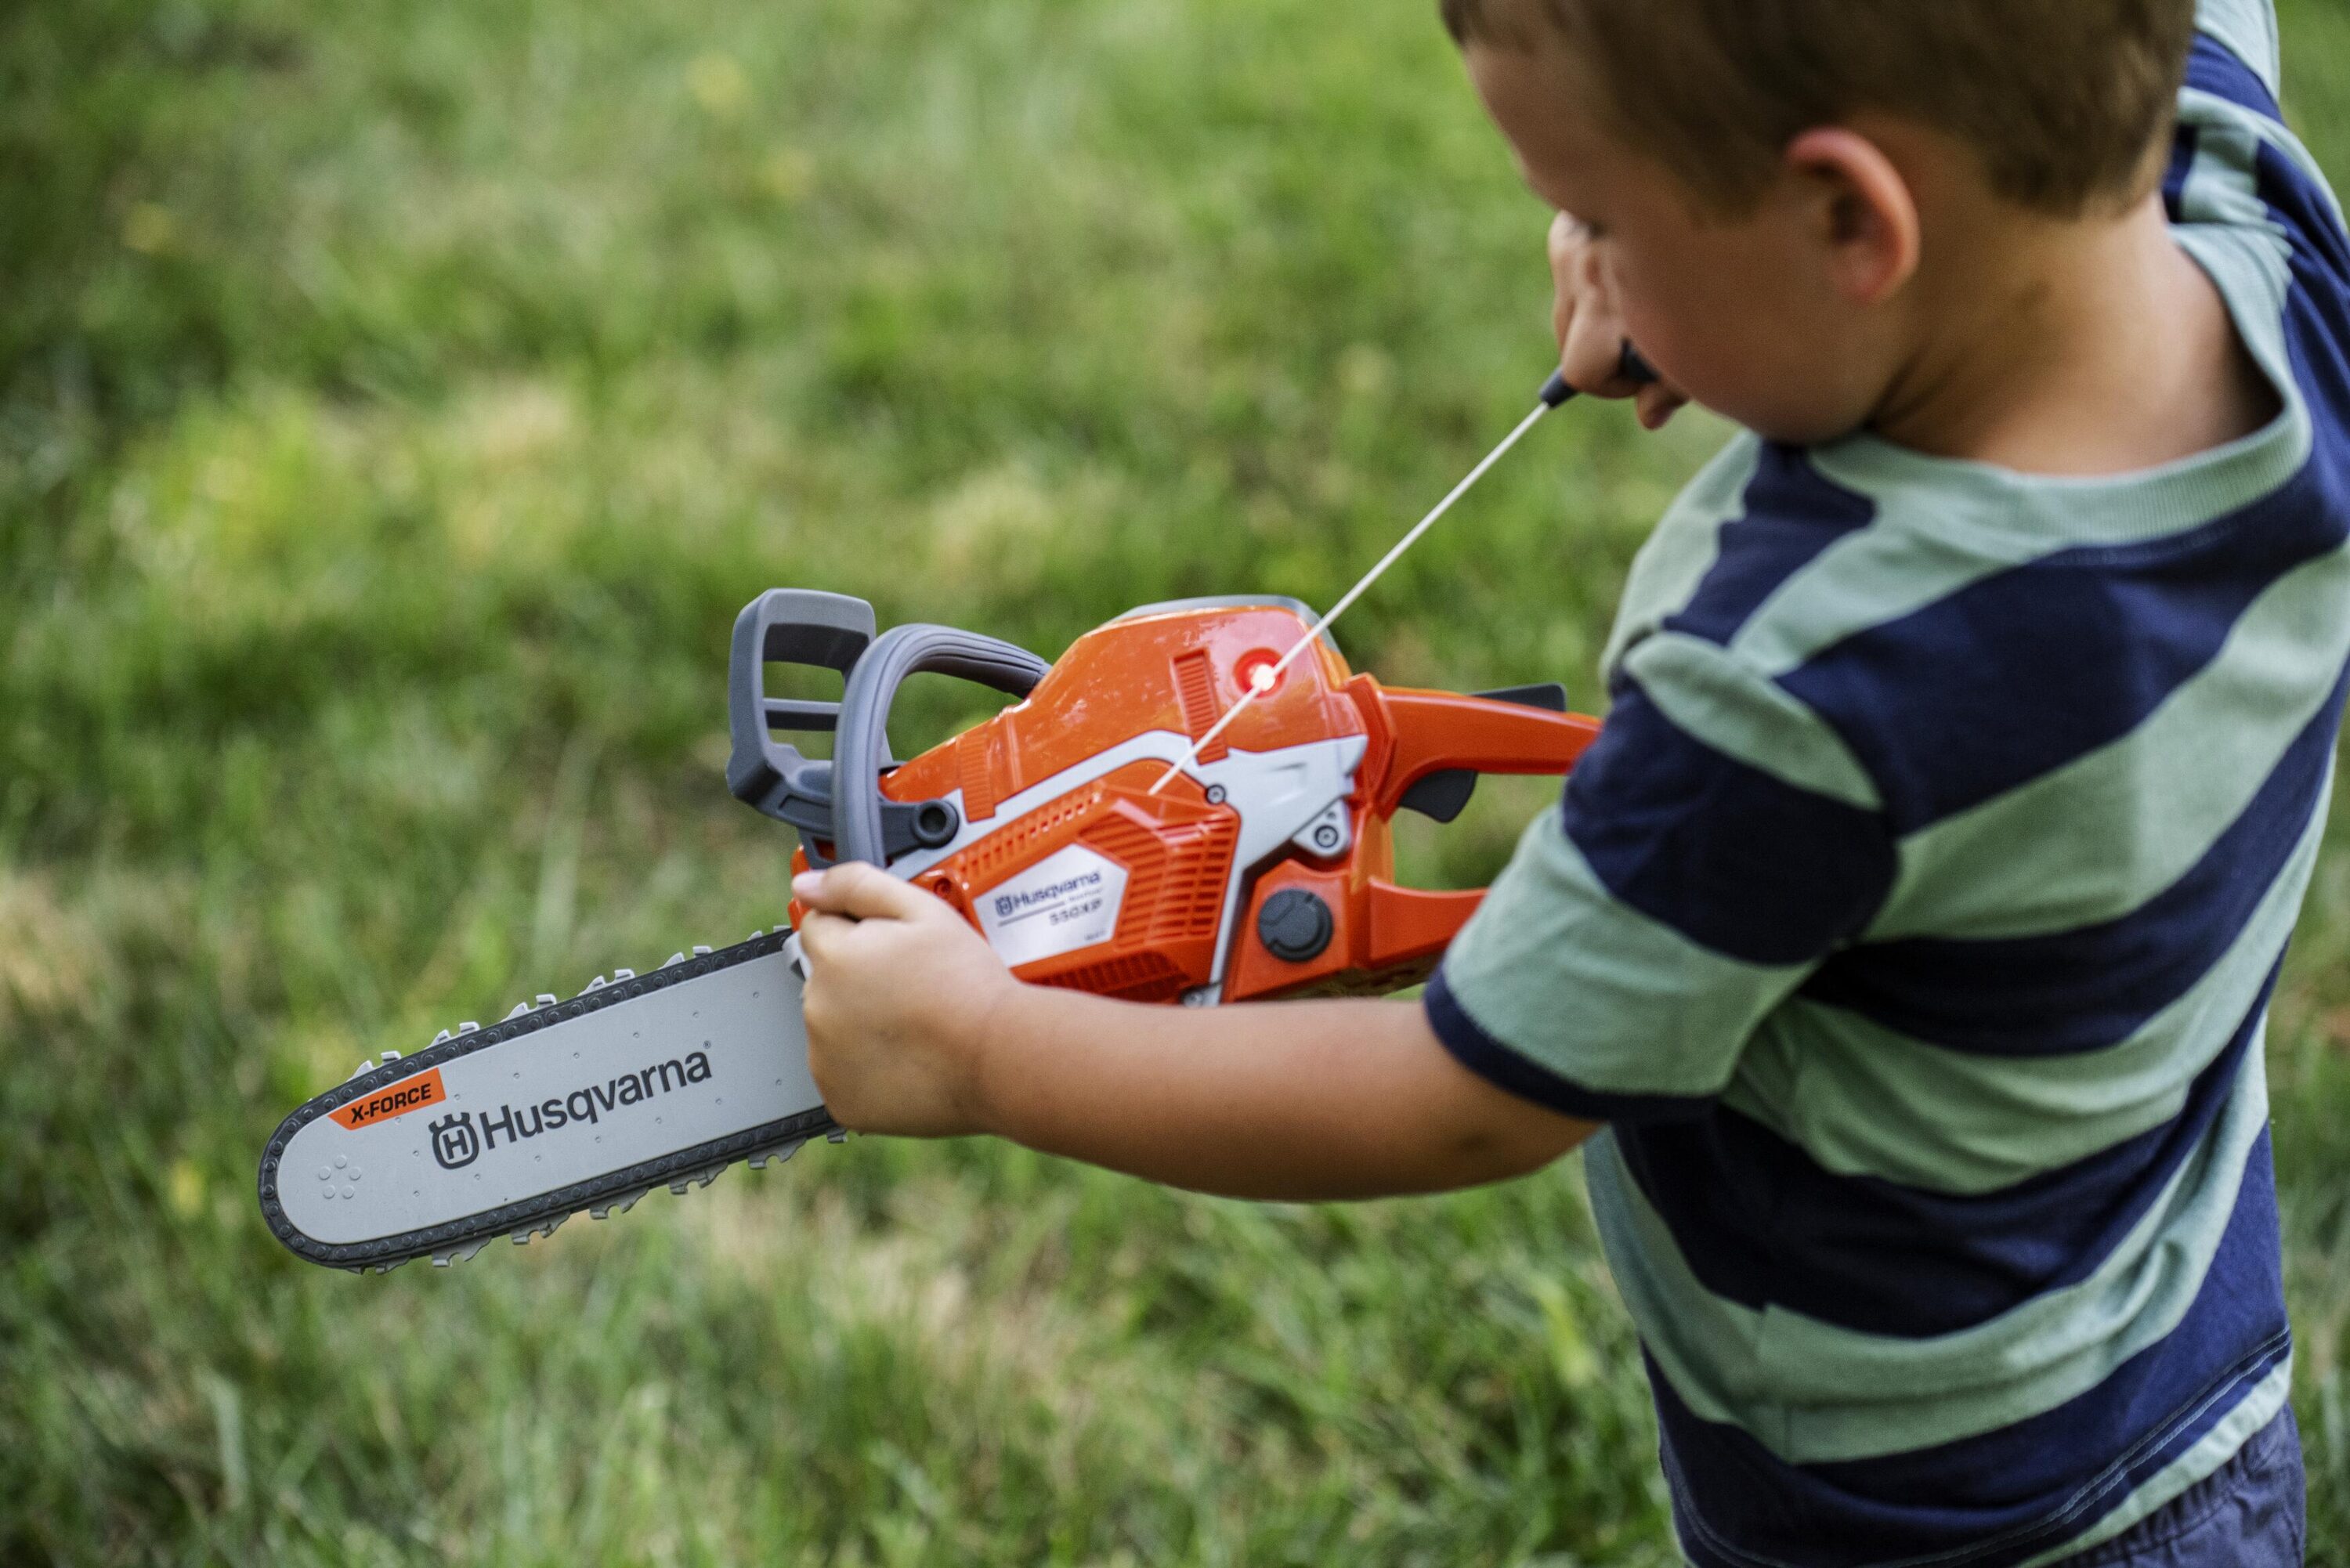  STIHL Battery Operated Chainsaw with Sound Kids Toy, for 3+  years : Toys & Games